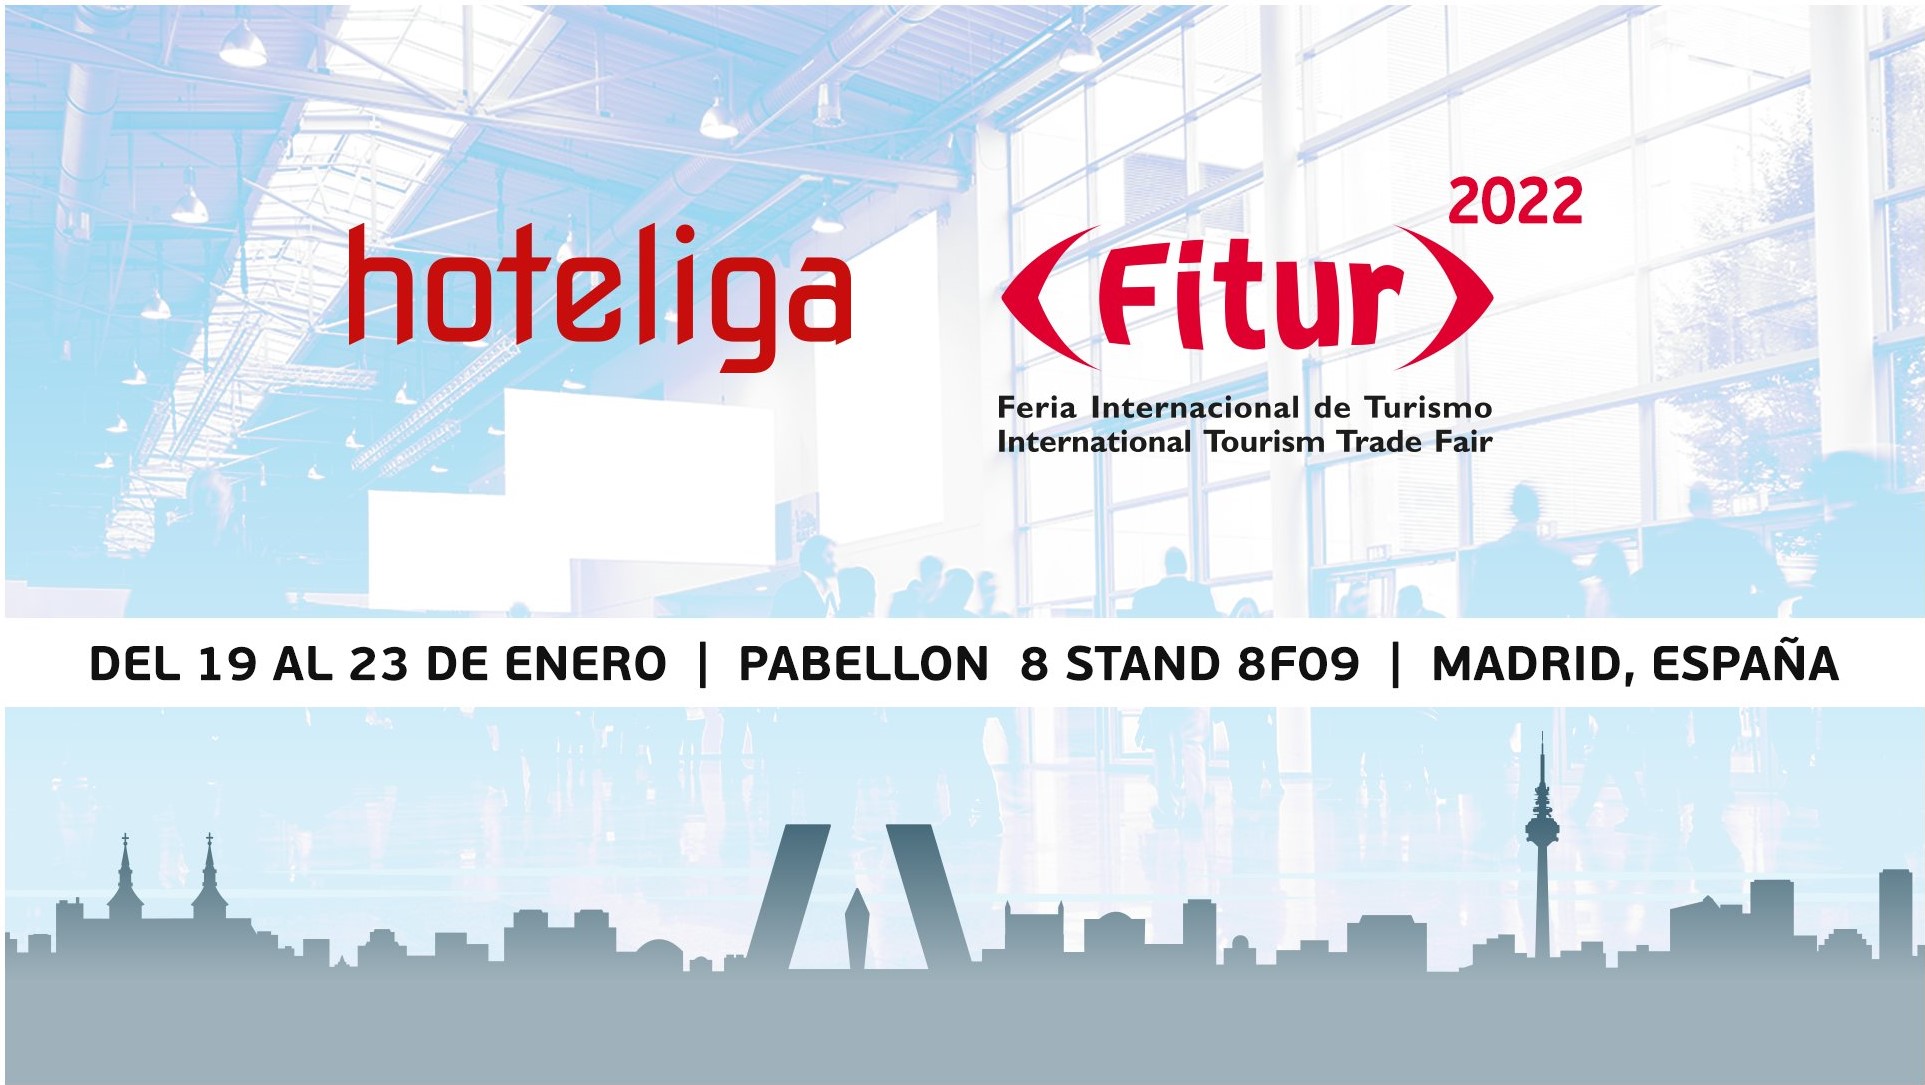 Fitur 2022: At the first meeting point of global tourism hoteliga will be there!